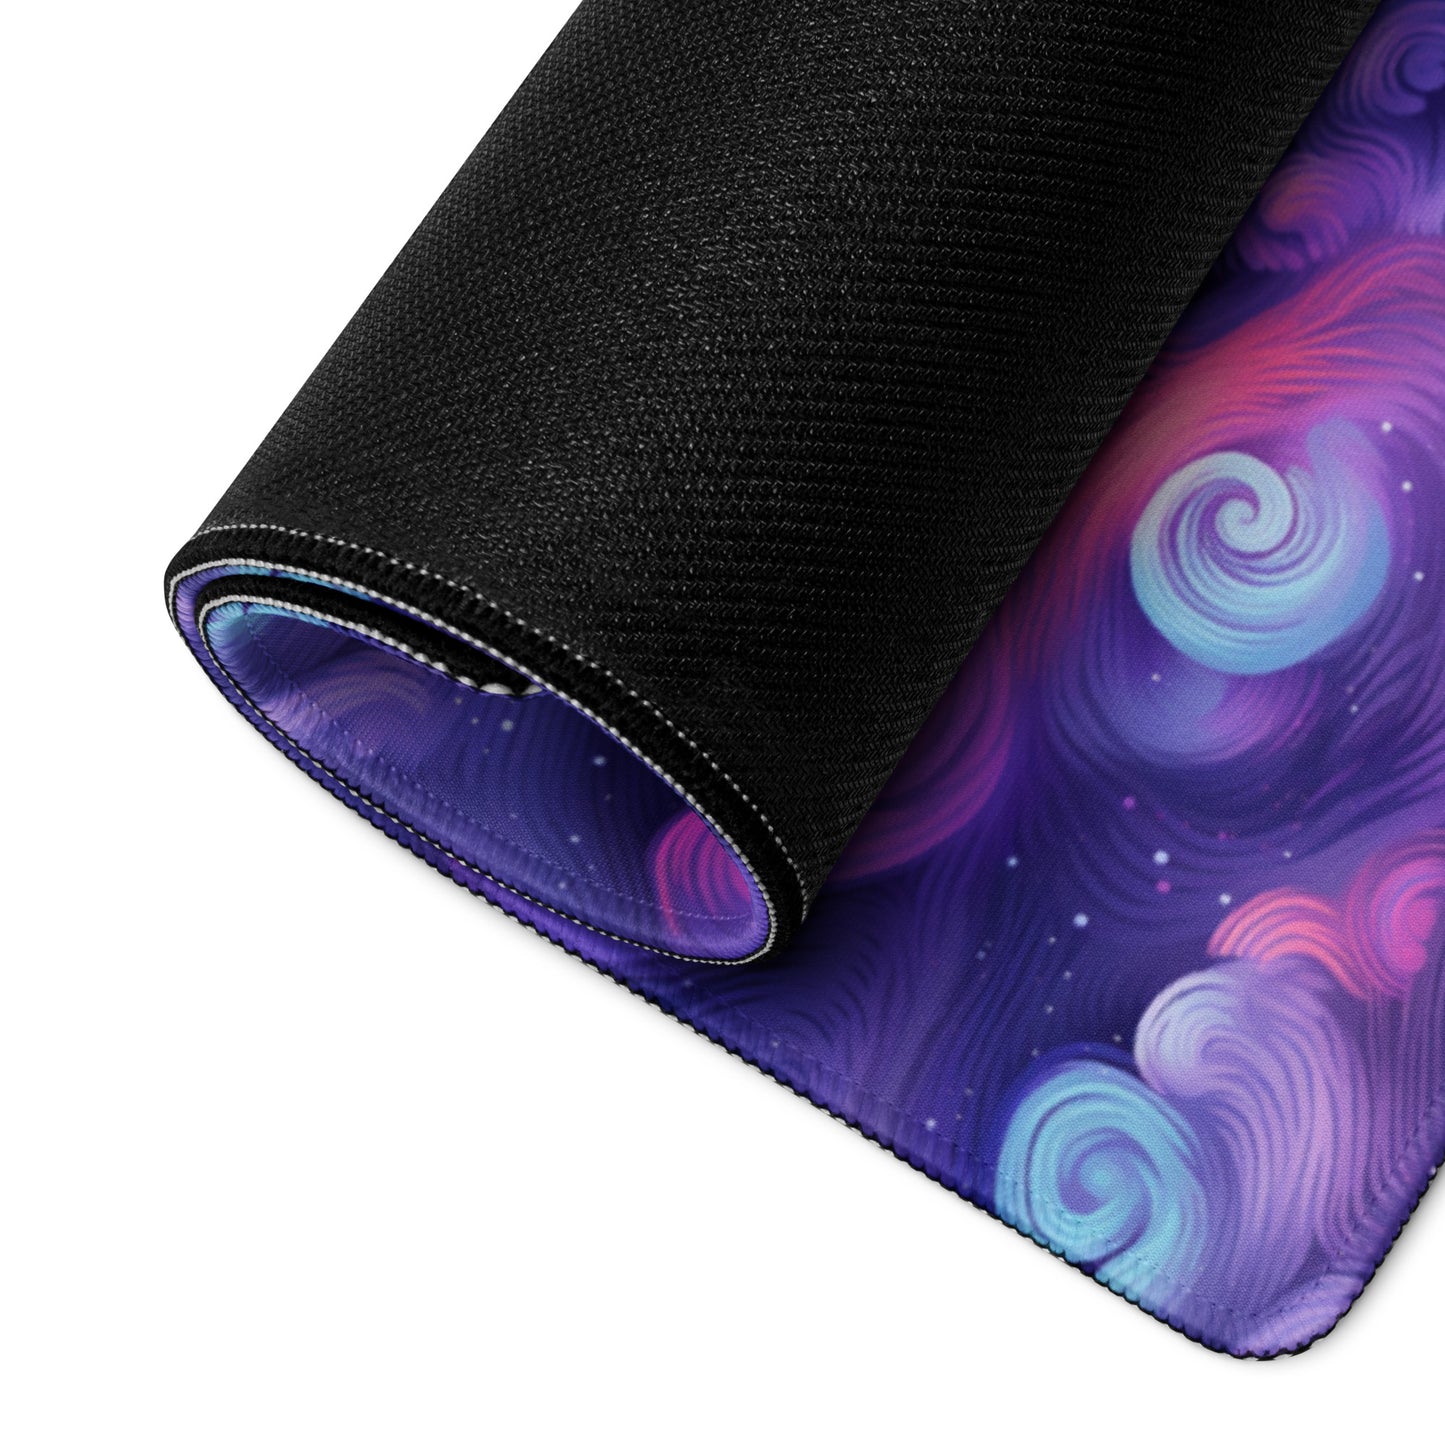 A 36" x 18" desk pad with fluffy clouds and stars on it rolled up. Blue and Purple in color